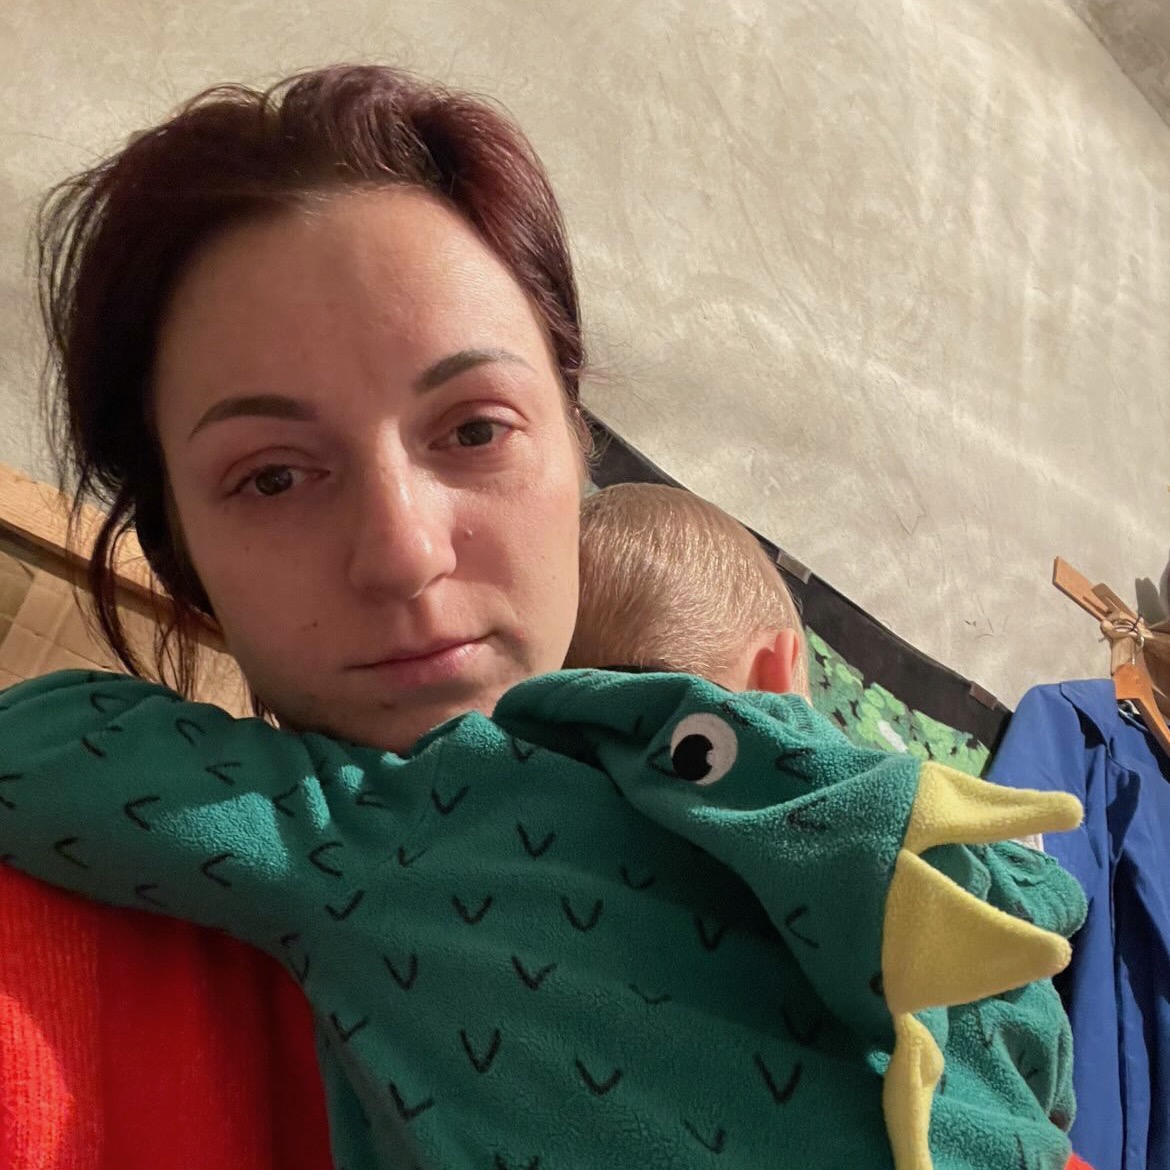 “The son has learned new words: ‘boom’ and ‘scared”, Halyna, 29, the Kyiv region